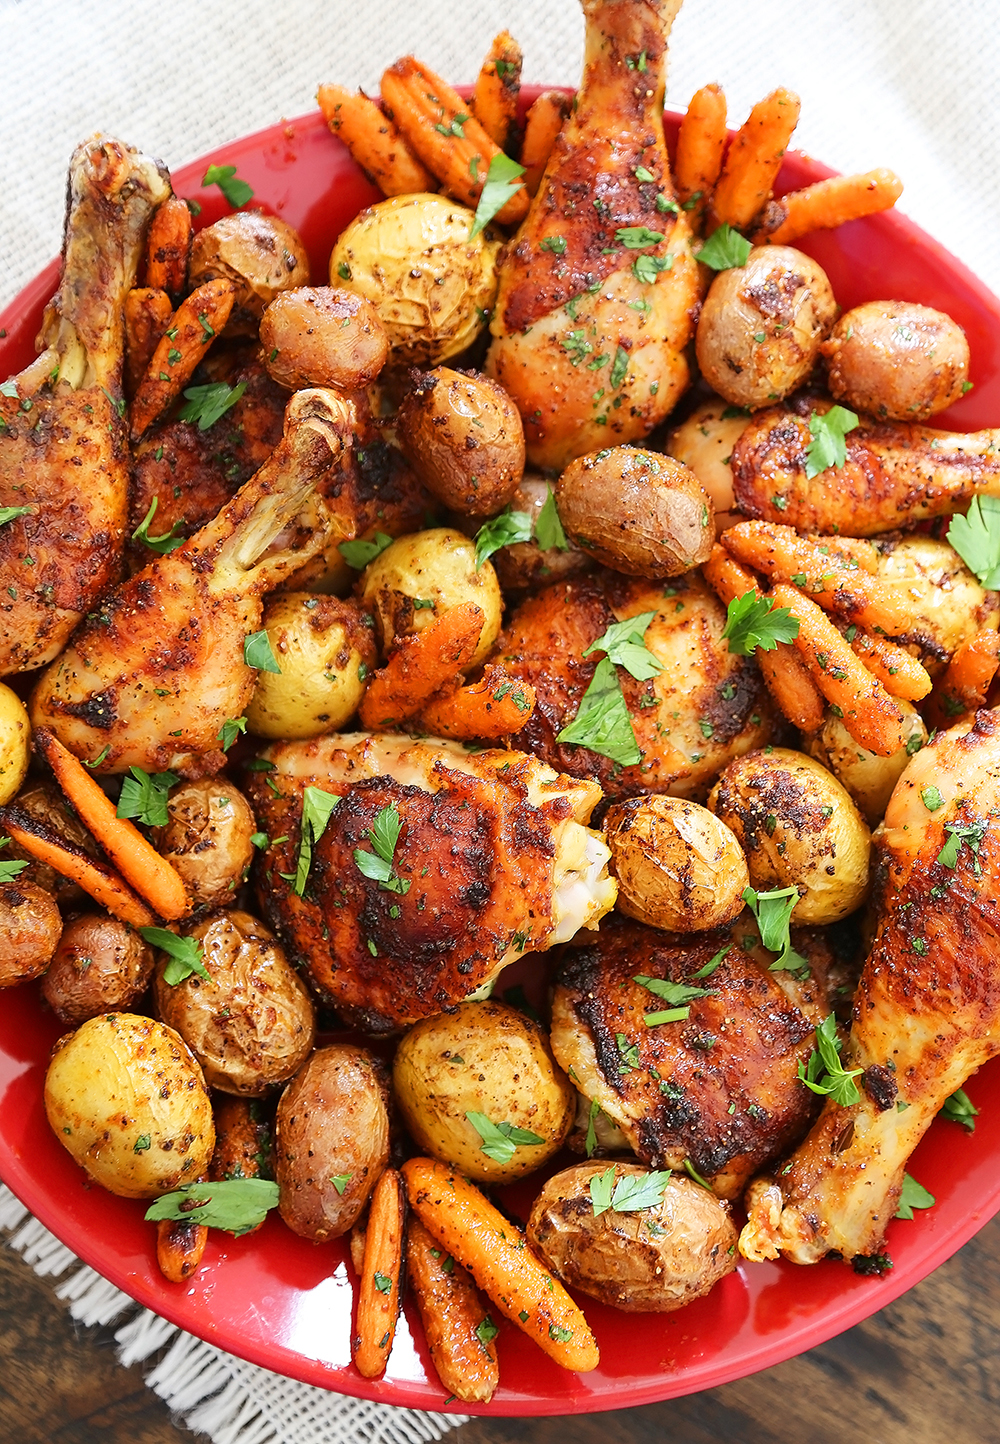 Chili-Garlic Roasted Chicken with Potatoes & Carrots - Spicy, crispy roasted chicken with tender potatoes and carrots! Just 1 pan + easy ingredients needed. So elegant and easy! Thecomfortofcooking.com